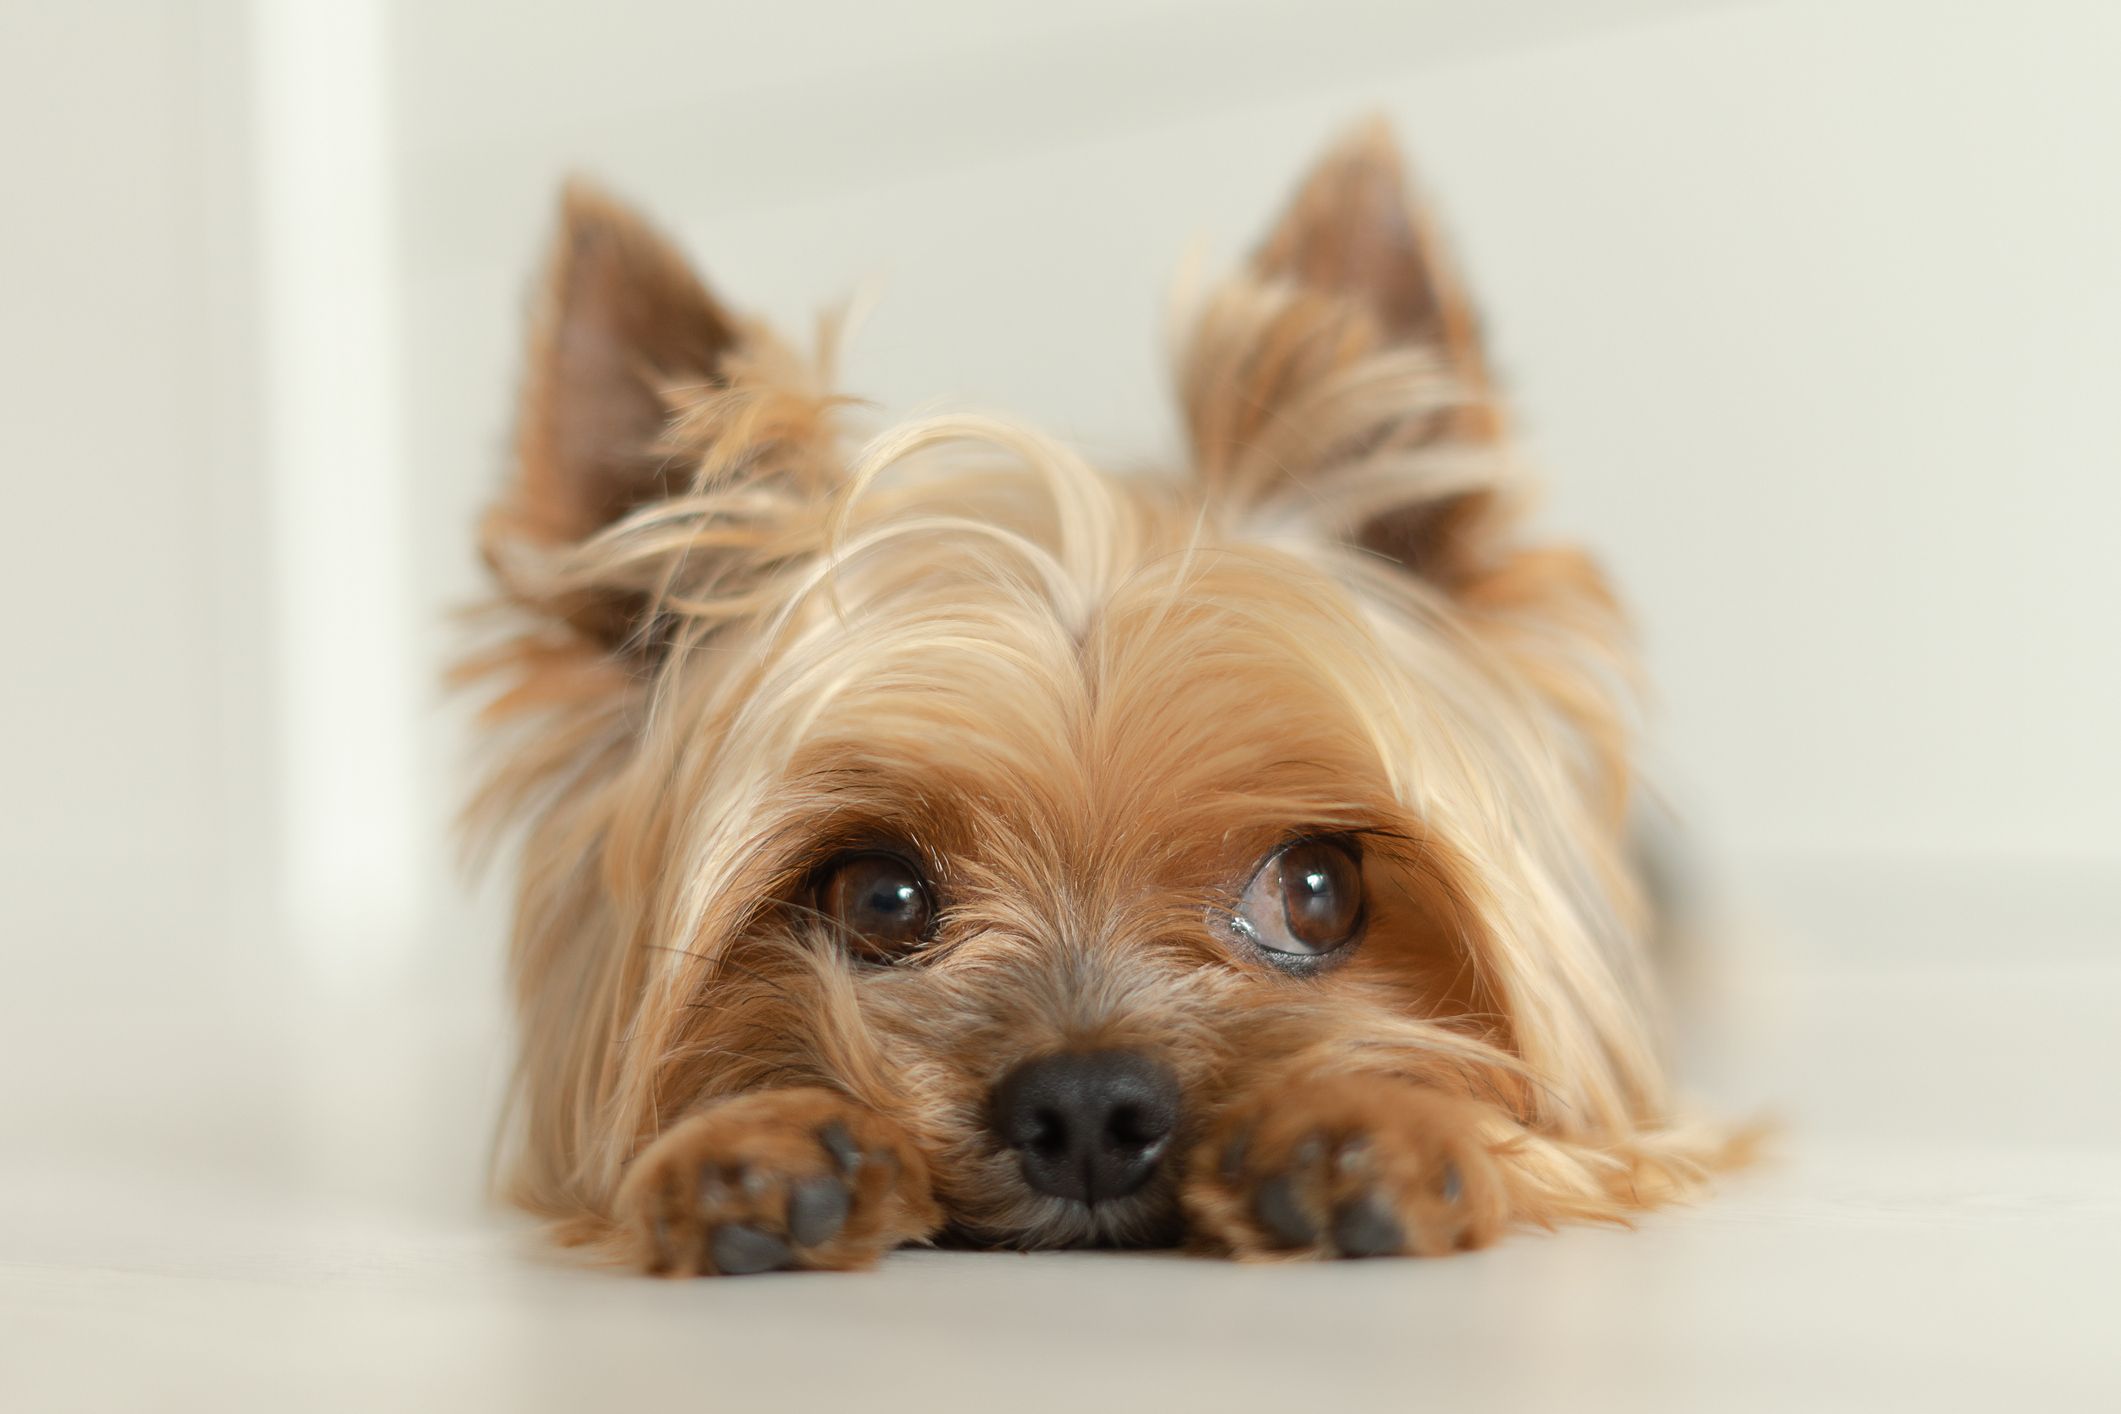 https://hips.hearstapps.com/hmg-prod/images/dog-yorkshire-terrier-lies-on-the-floor-with-paws-royalty-free-image-1682539706.jpg